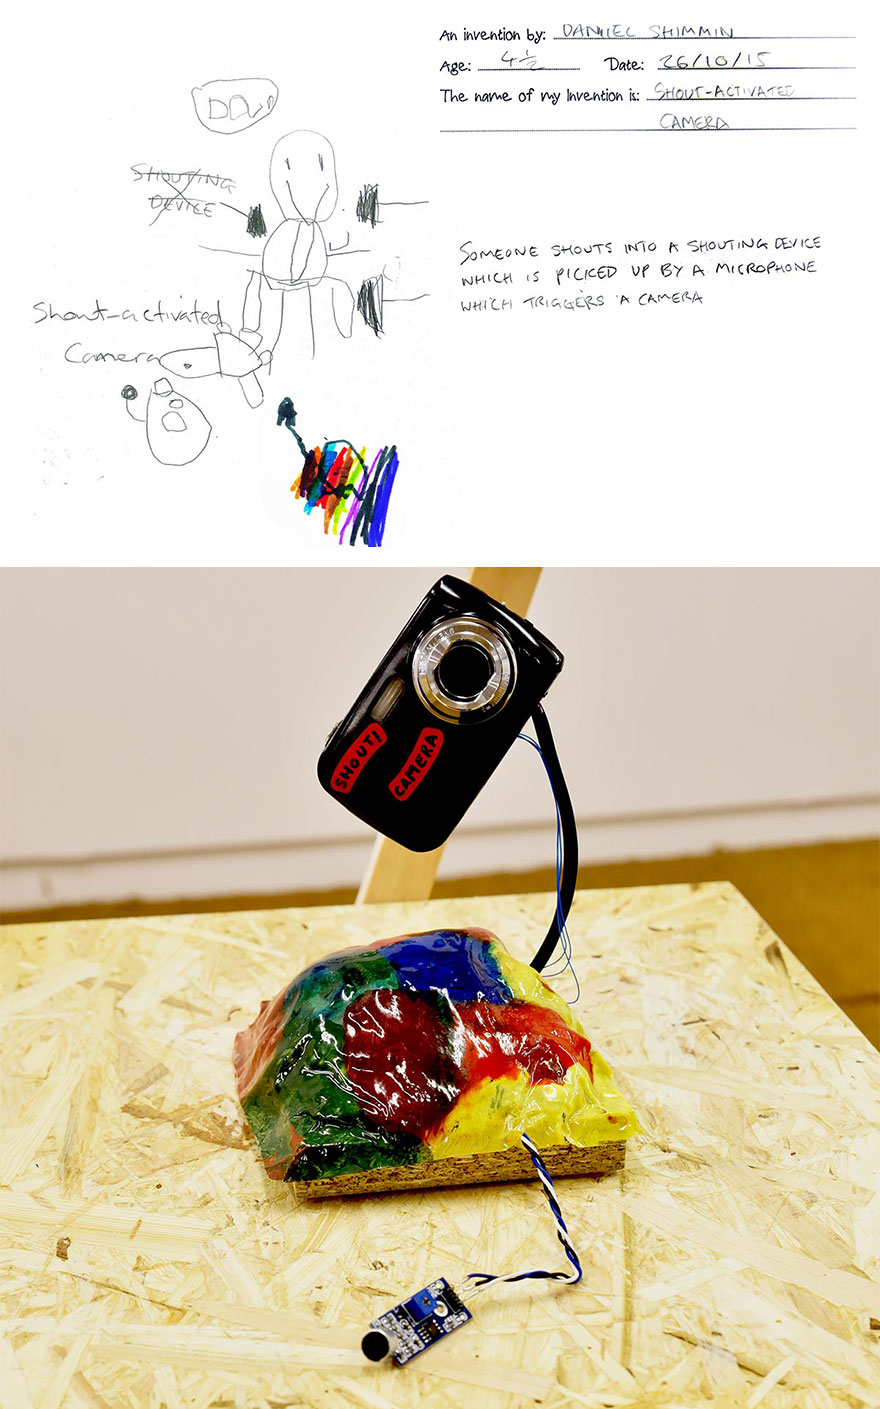 kids-inventions-turned-into-reality-inventors-project-dominic-wilcox-79__880